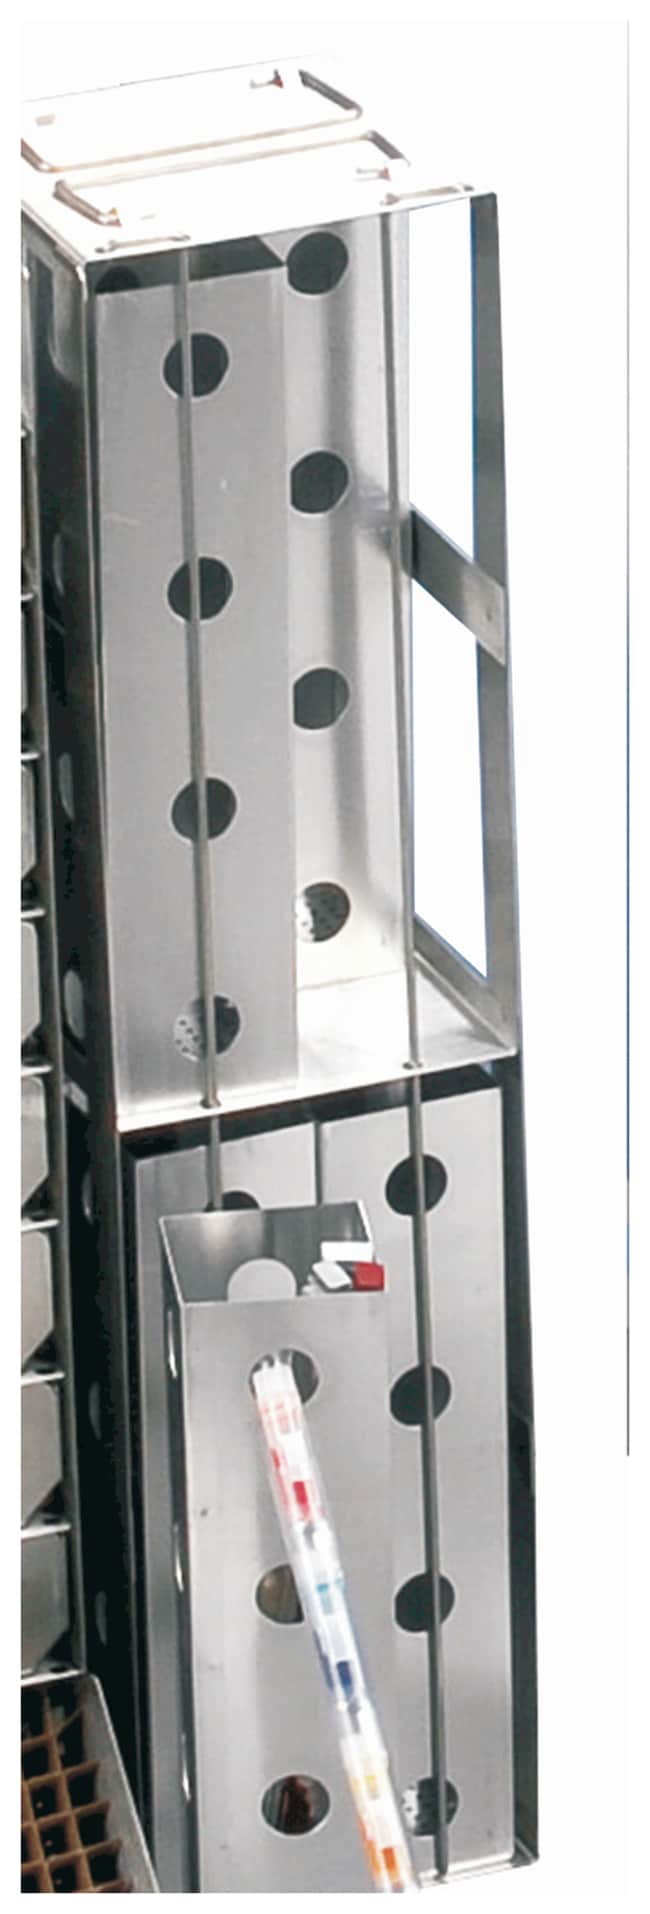 CryoPlus&trade; Canisters, Frames and Dividers